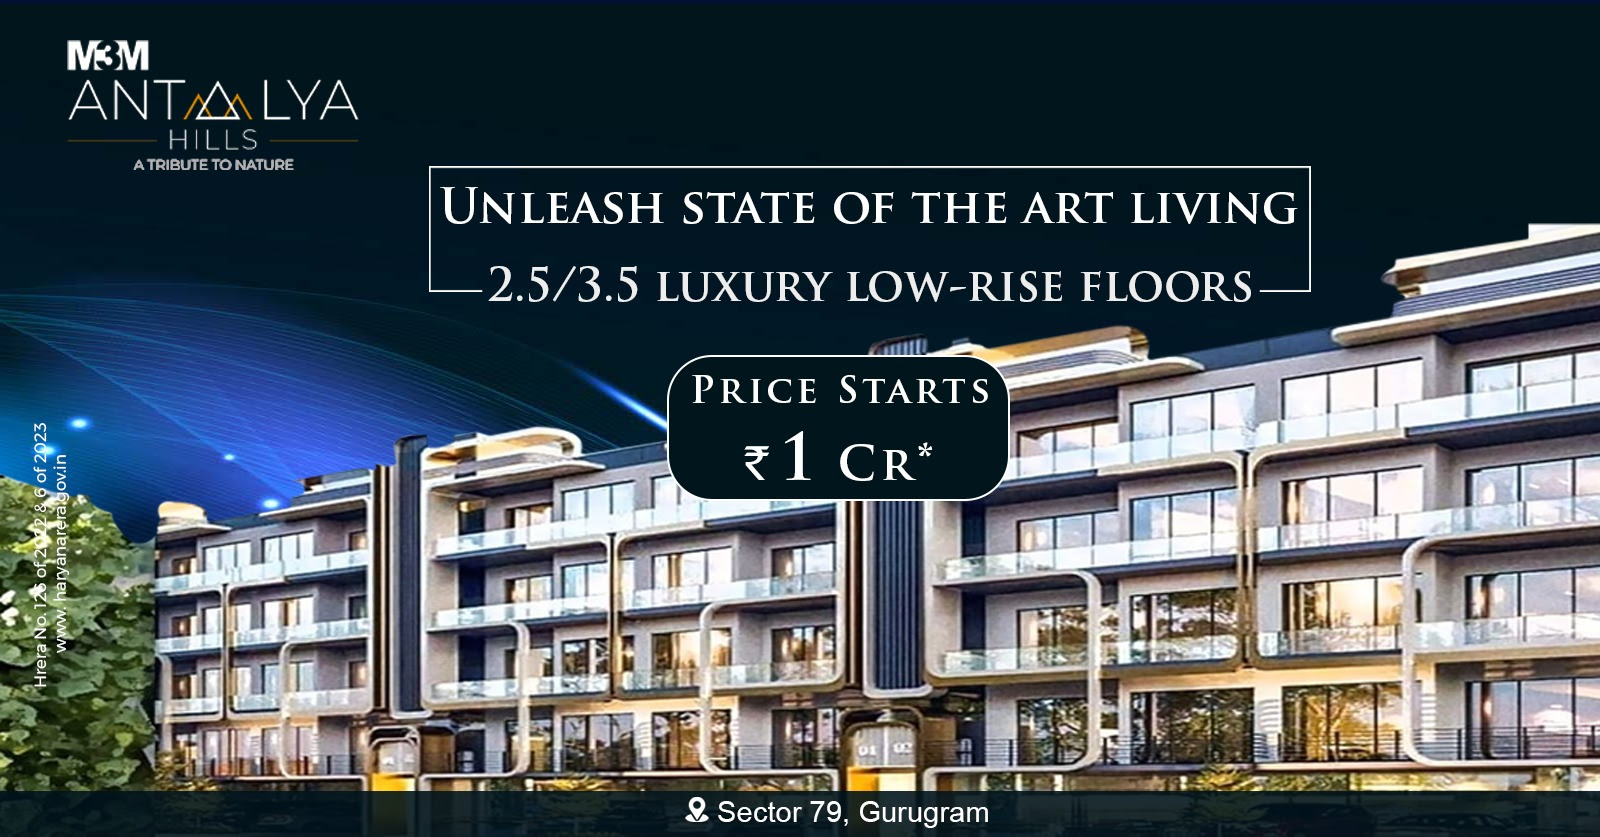 A unique luxury mix Of low street retail shop & uber residences at M3M Antalya Hills in Sector 79, Gurgaon Update